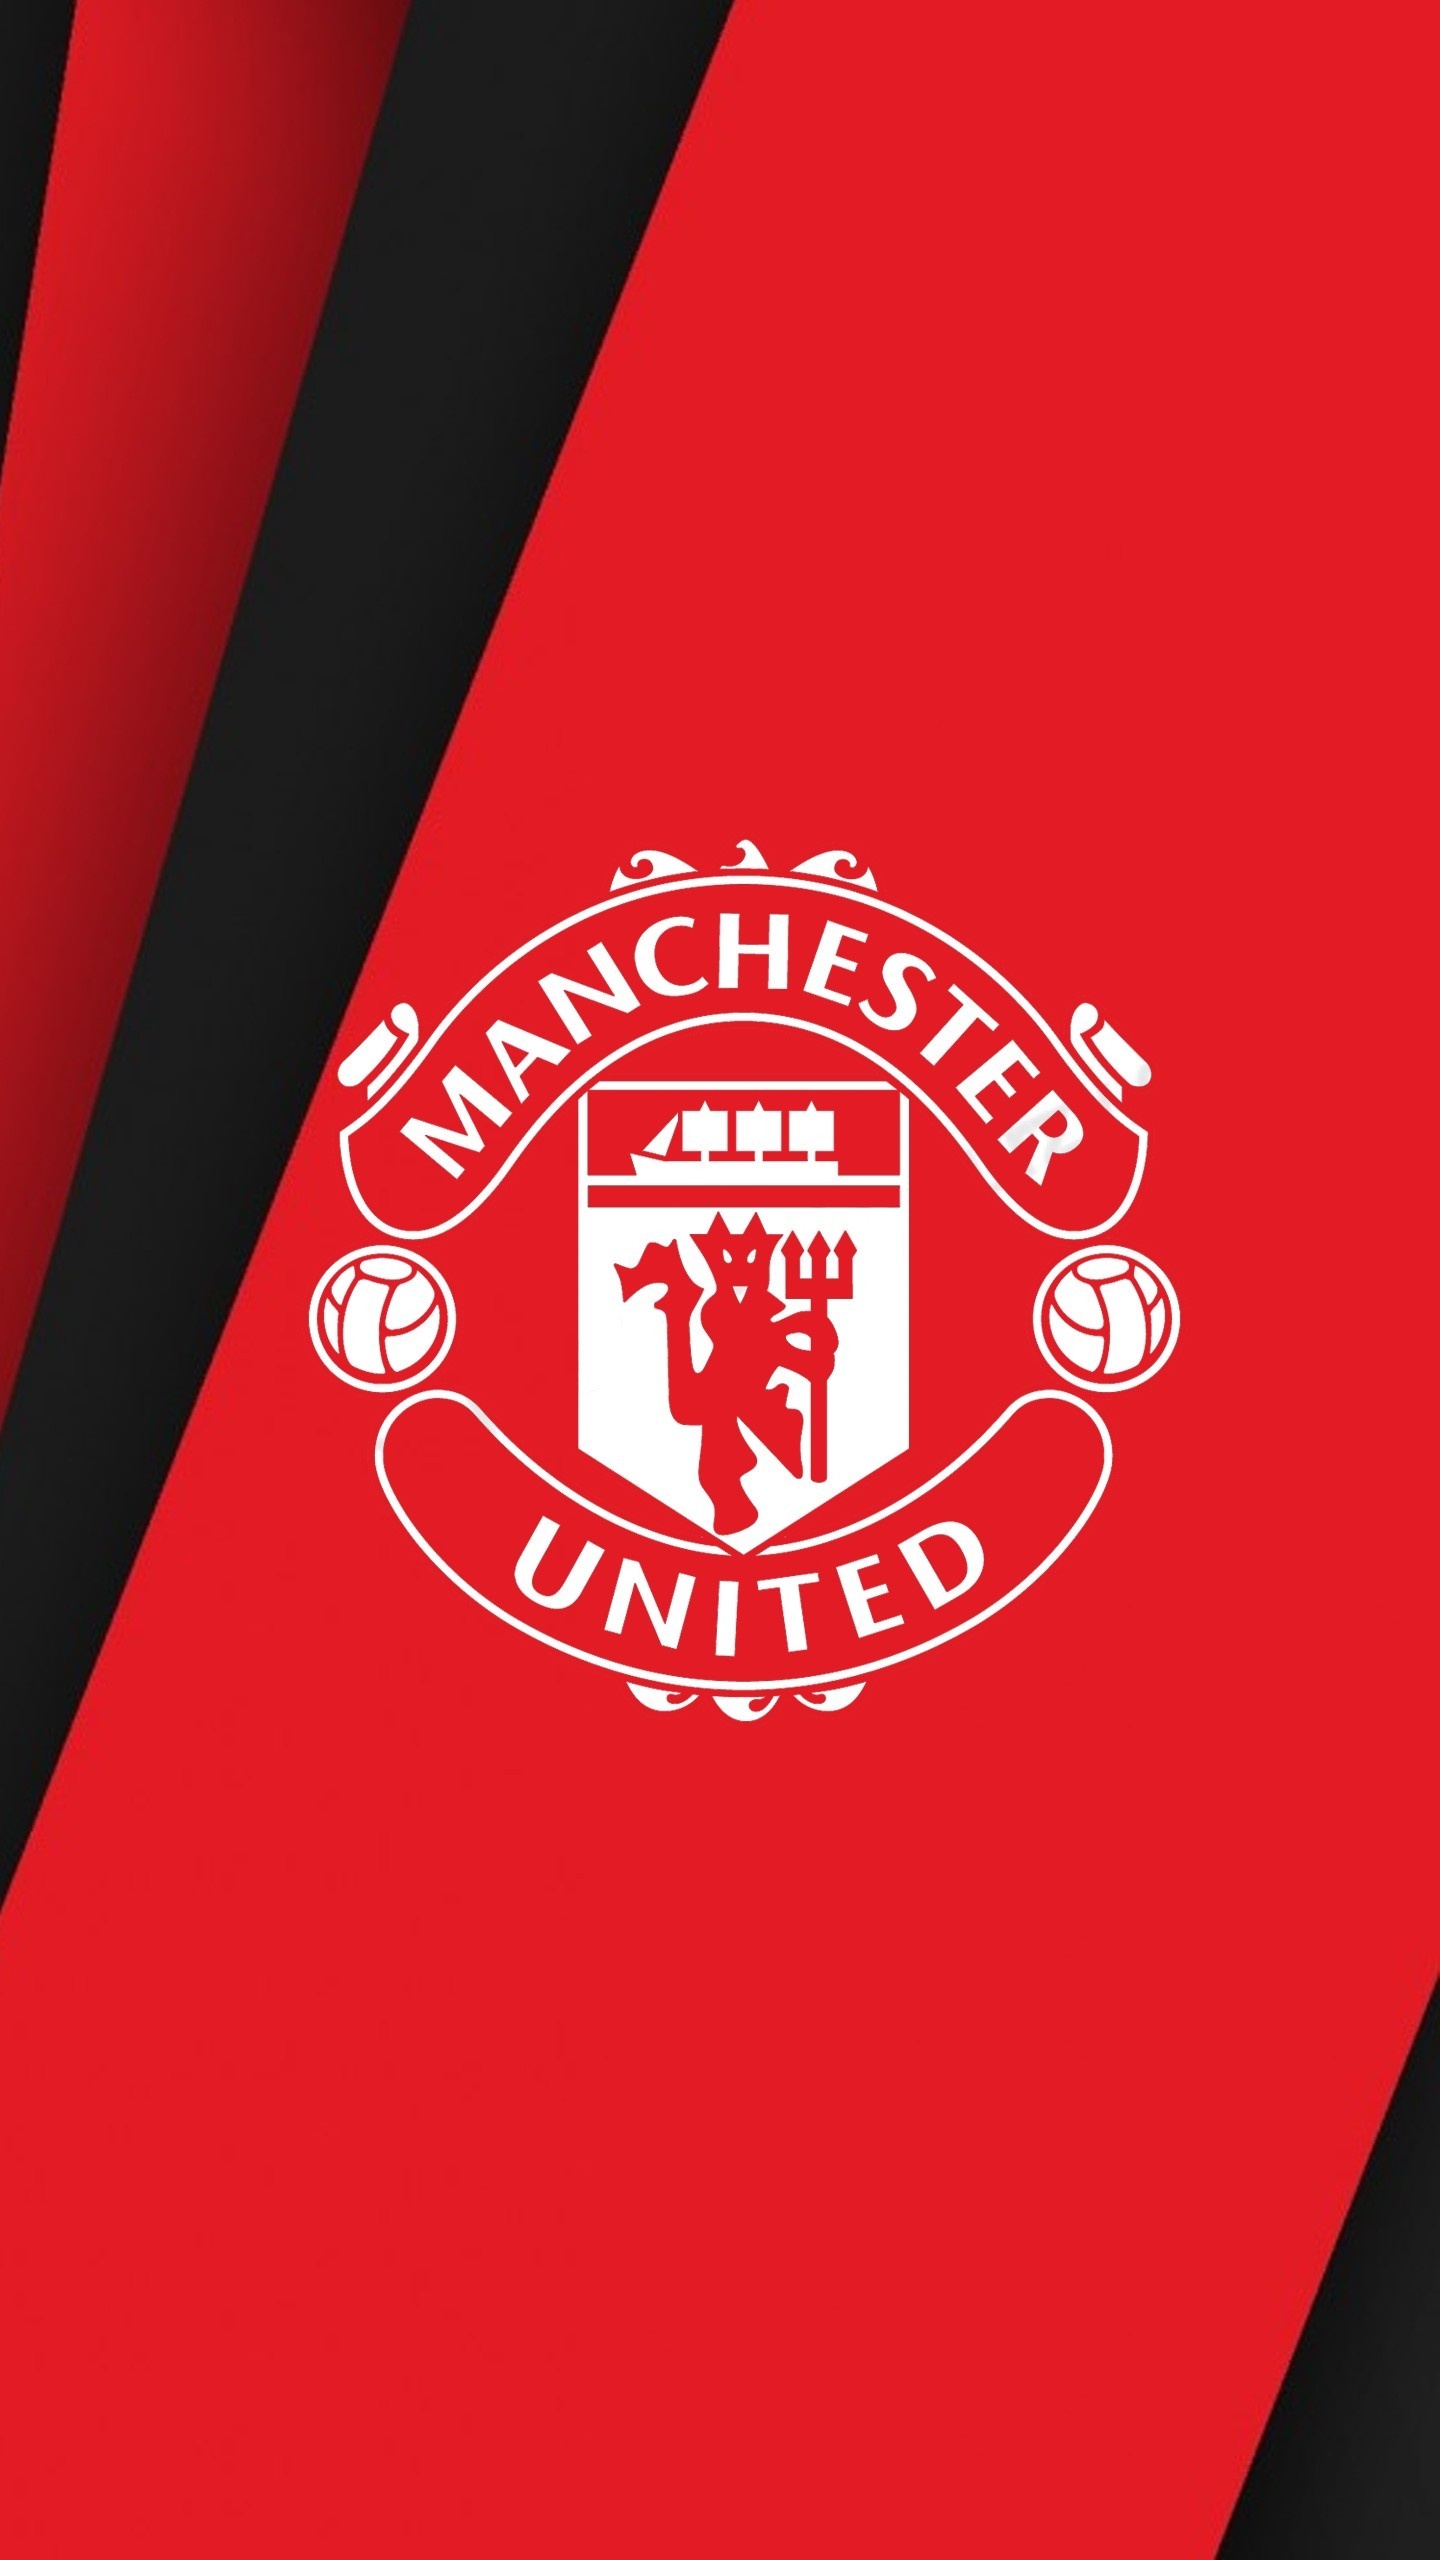 Manchester United: The club started the 1892–93 season in the Football League First Division. 1440x2560 HD Background.